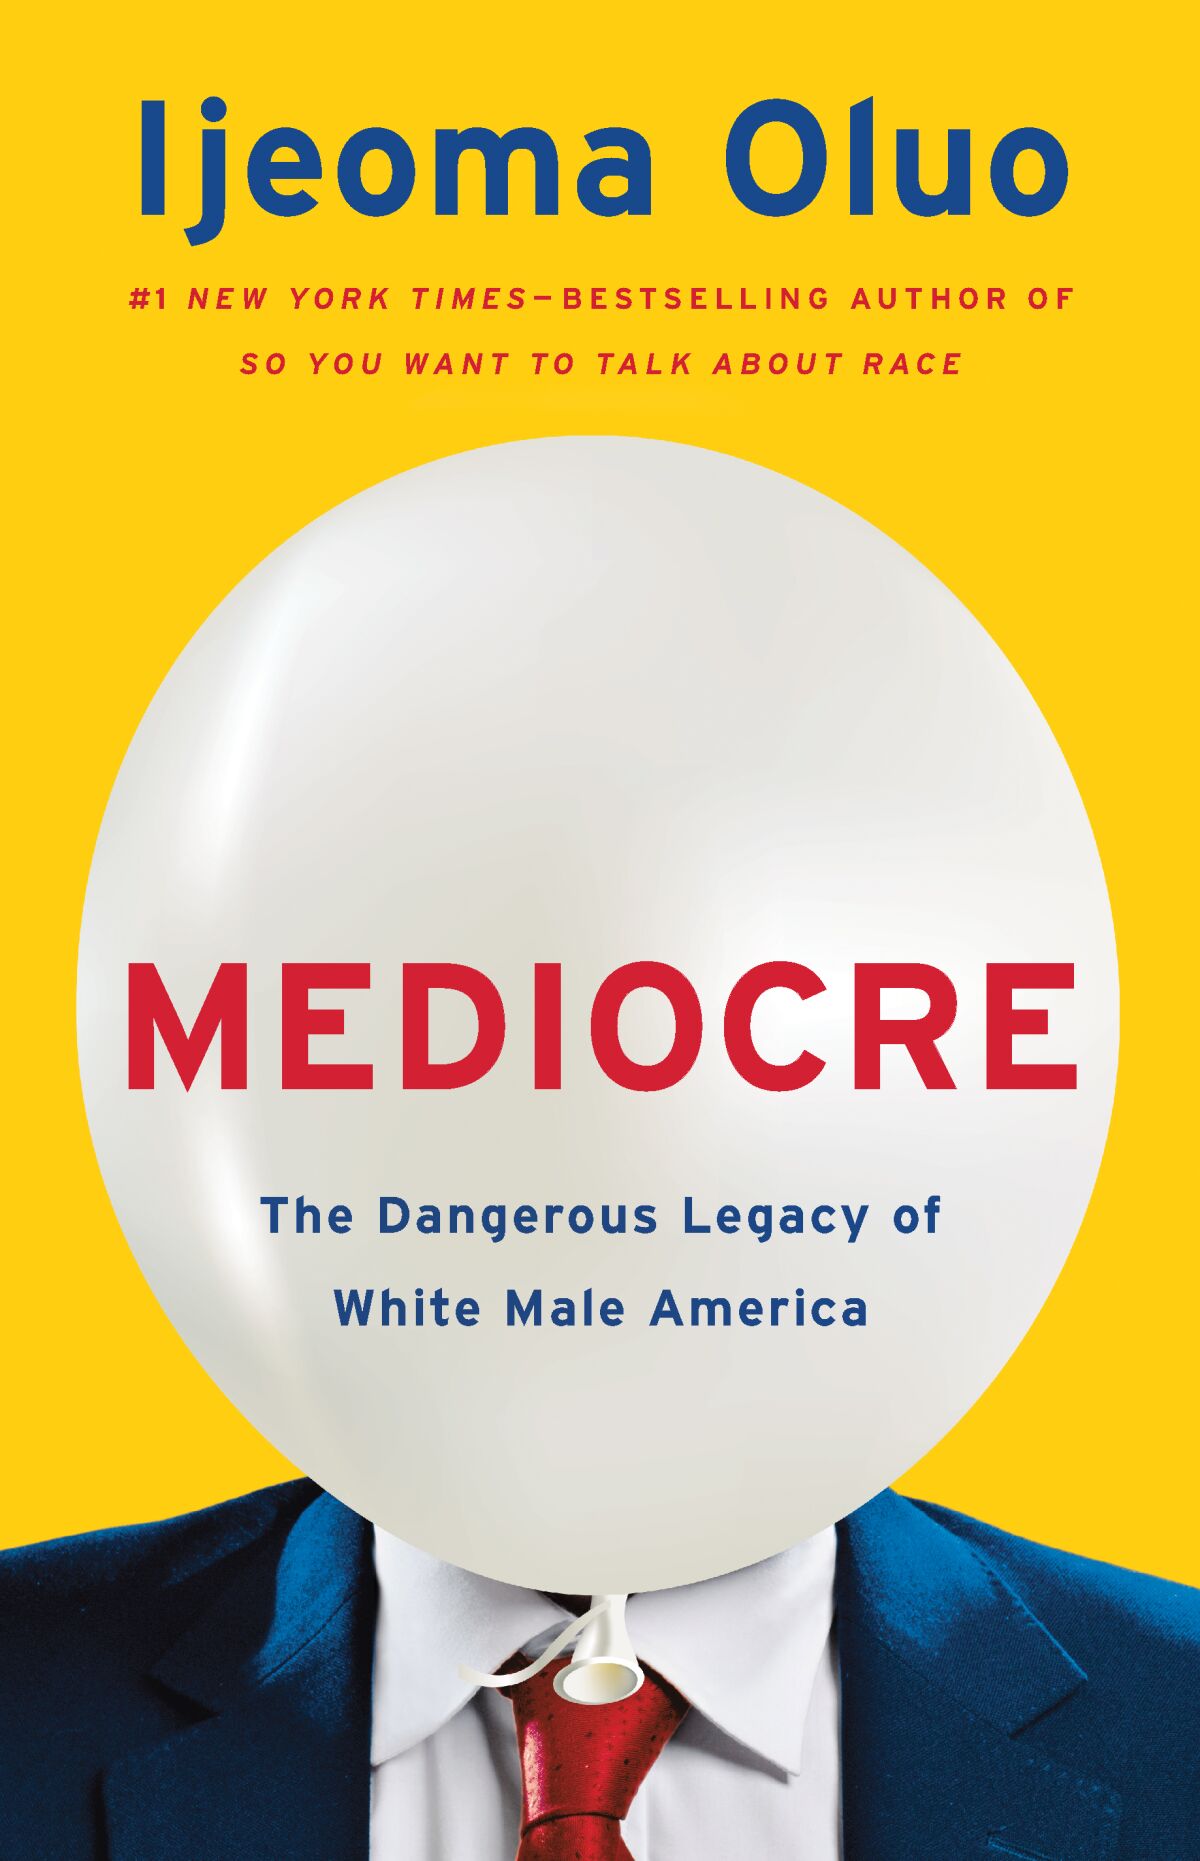 Cover of the book "Mediocre" by Ijeoma Oluo.